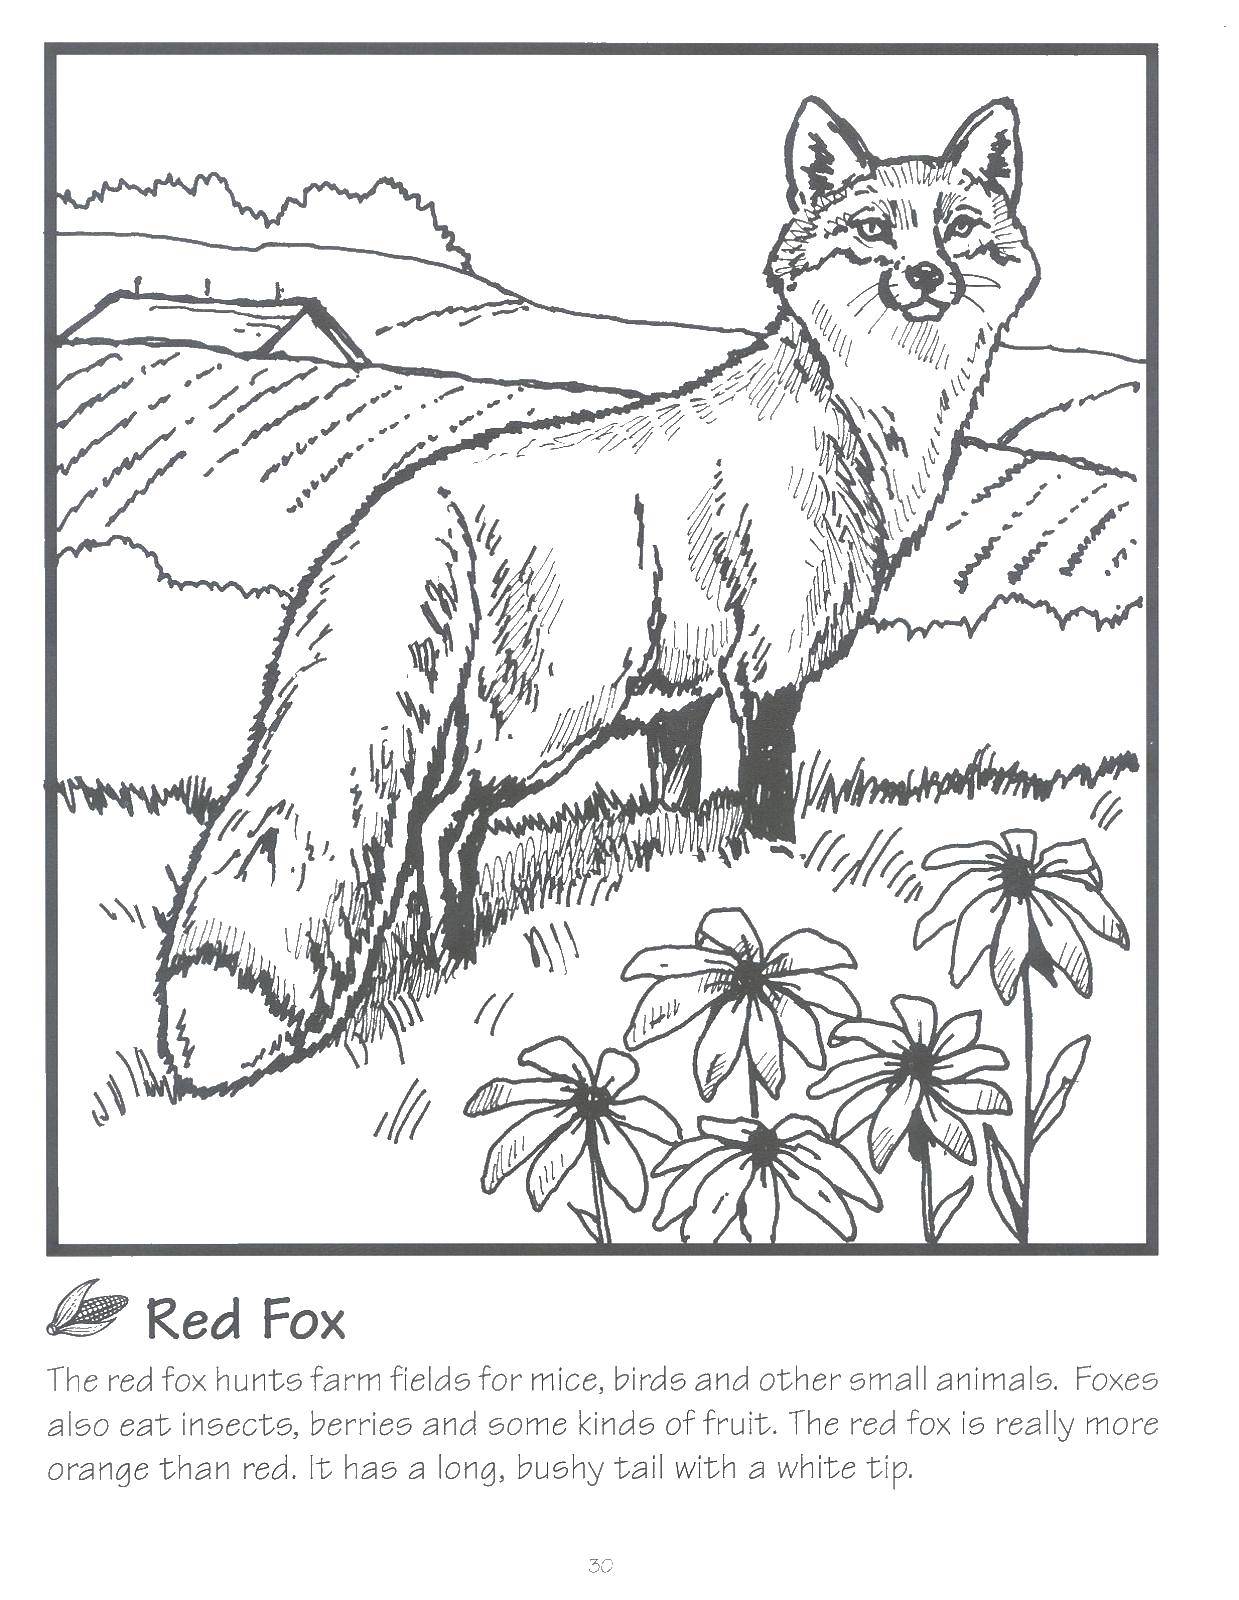 Coloring Fox in the box. Category Wild animals. Tags:  Fox, field, chamomile.